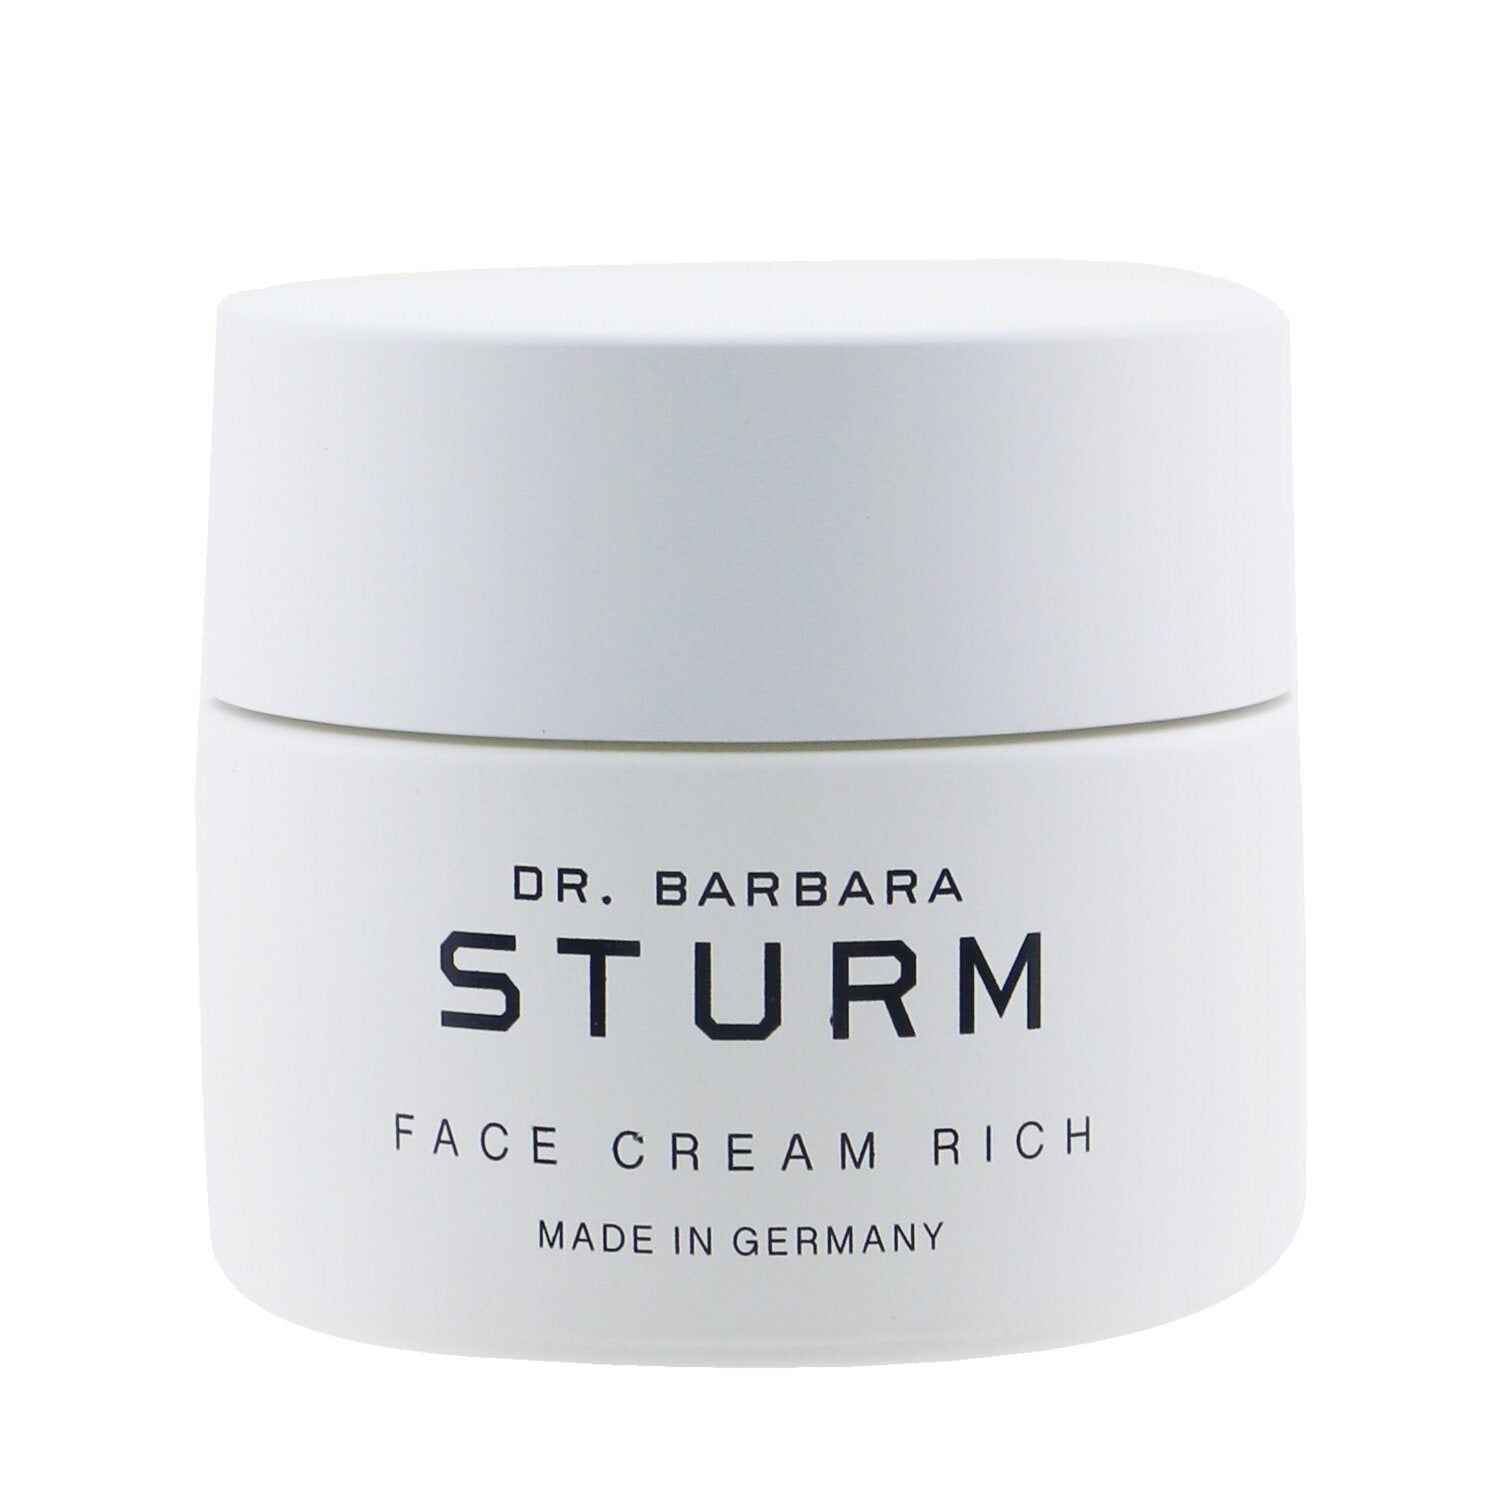 DR. BARBARA STURM - Face Cream Rich is the product name that should replace "Dr barbara strum face cream rich" in the sentence.